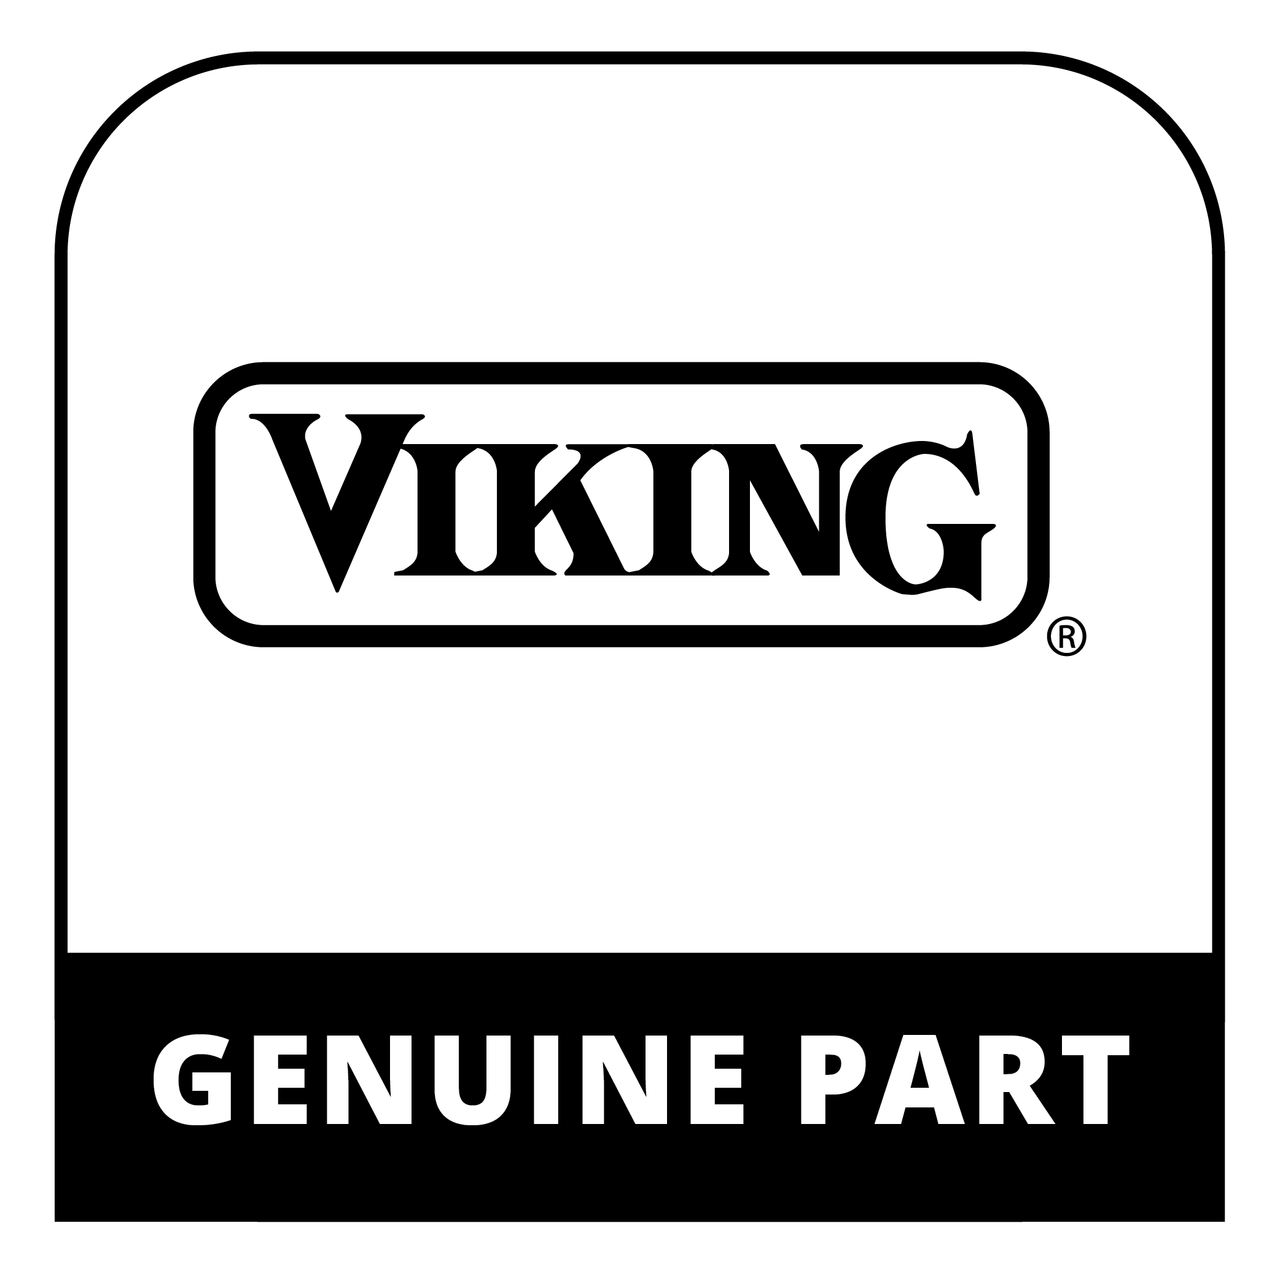 Viking 068951-7585 - Central Cover, 66"- Reduction Red (Re) - Genuine Viking Part